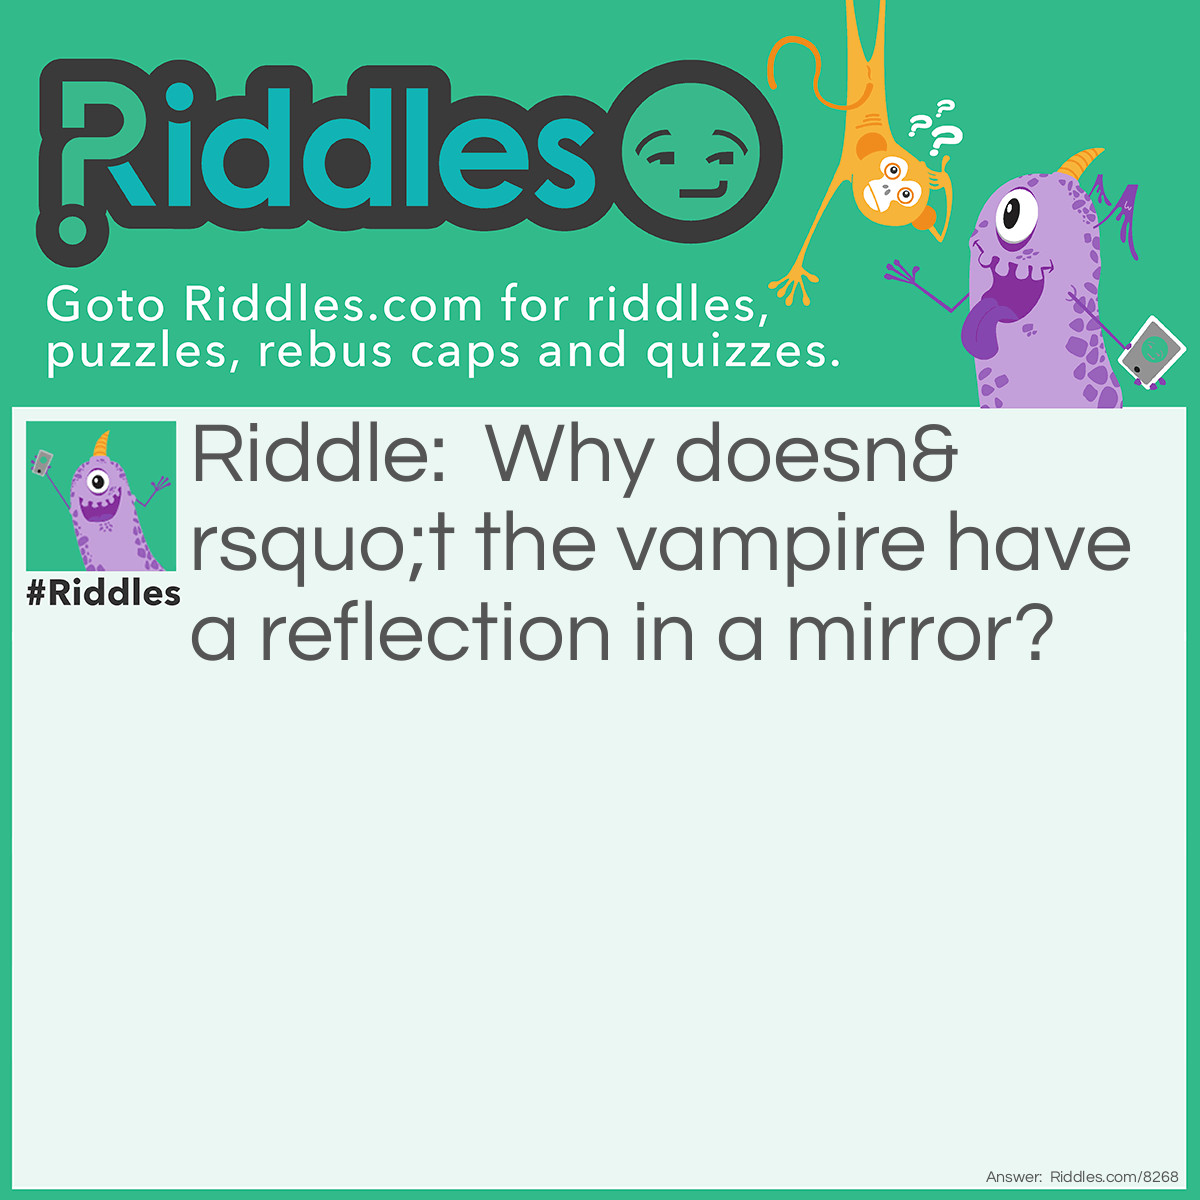 Riddle: Why doesn't the vampire have a reflection in a mirror? Answer: Because his reflection quit its job.